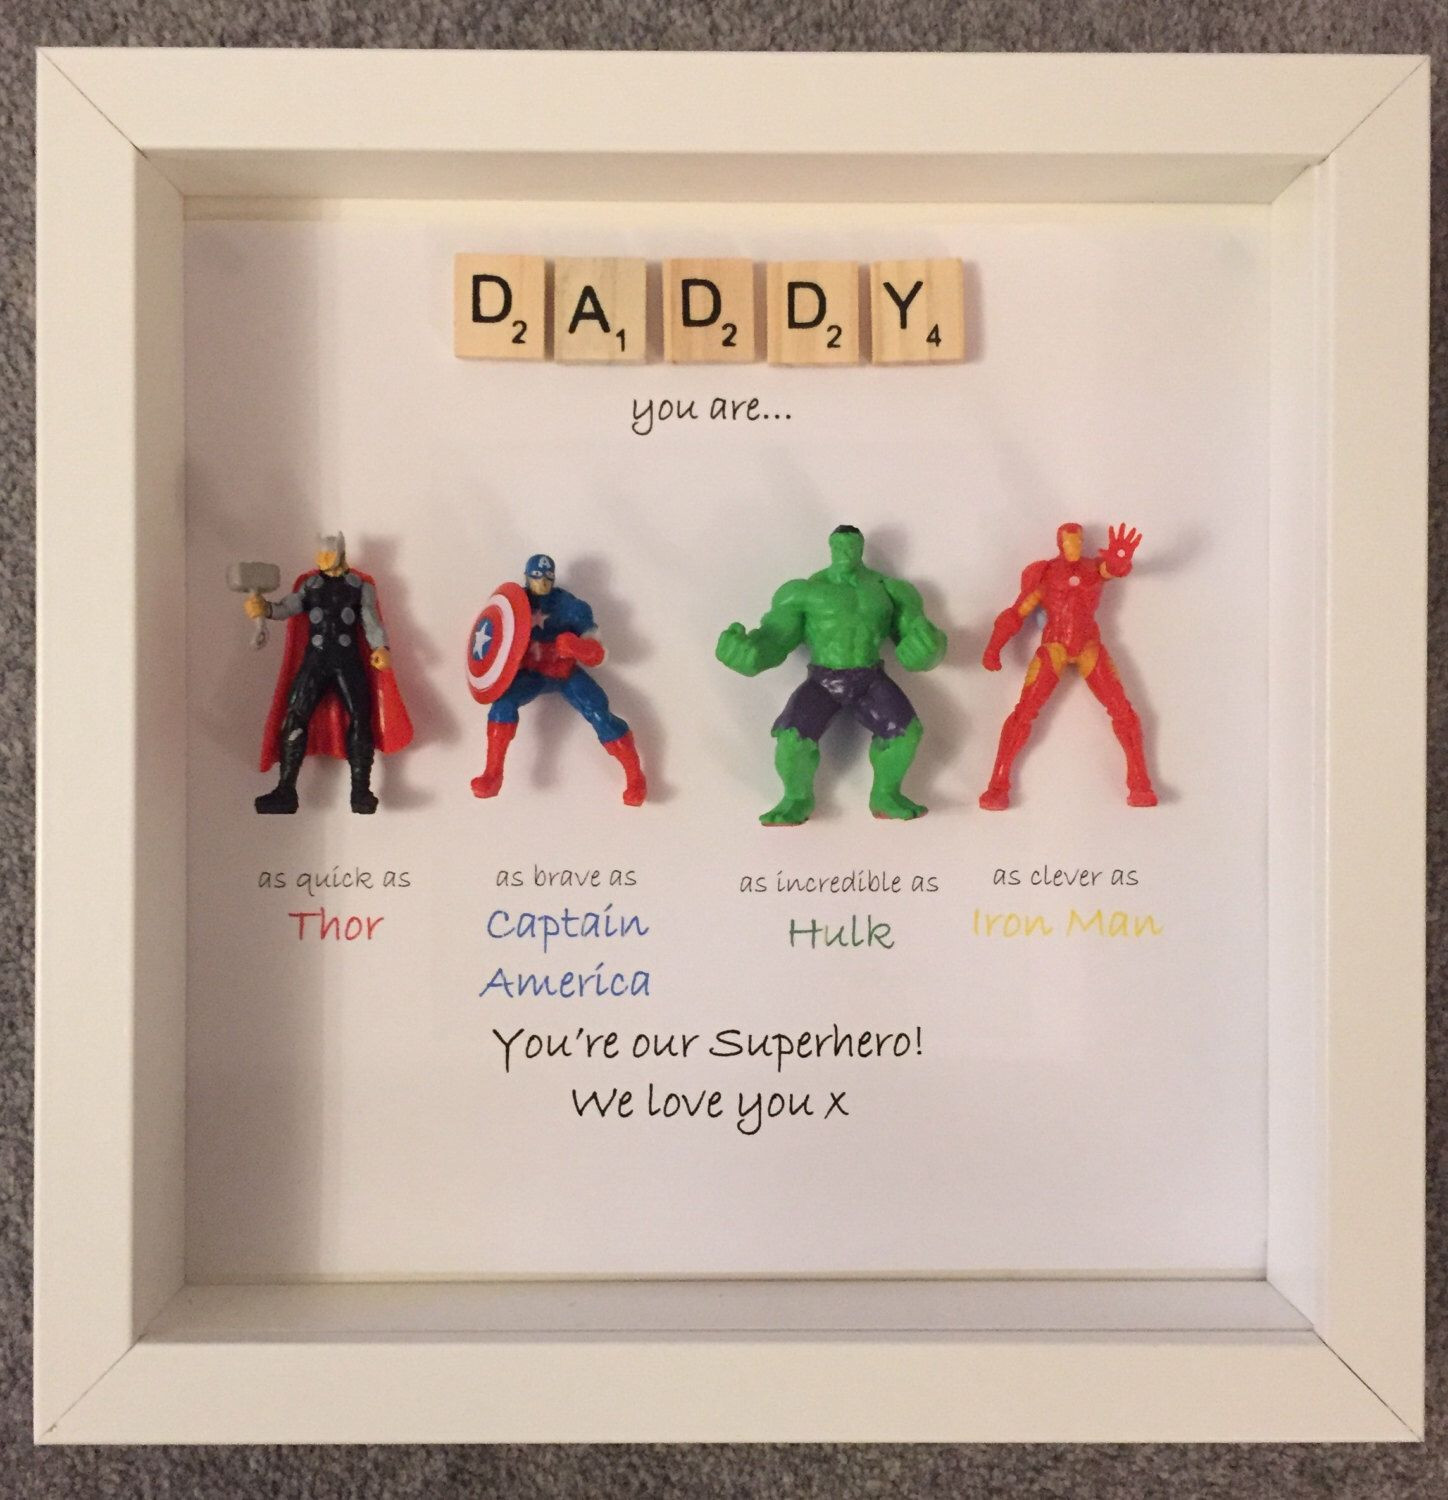 Good Gifts For Dads Birthday
 Avengers Superhero figures frame t Ideal for dad